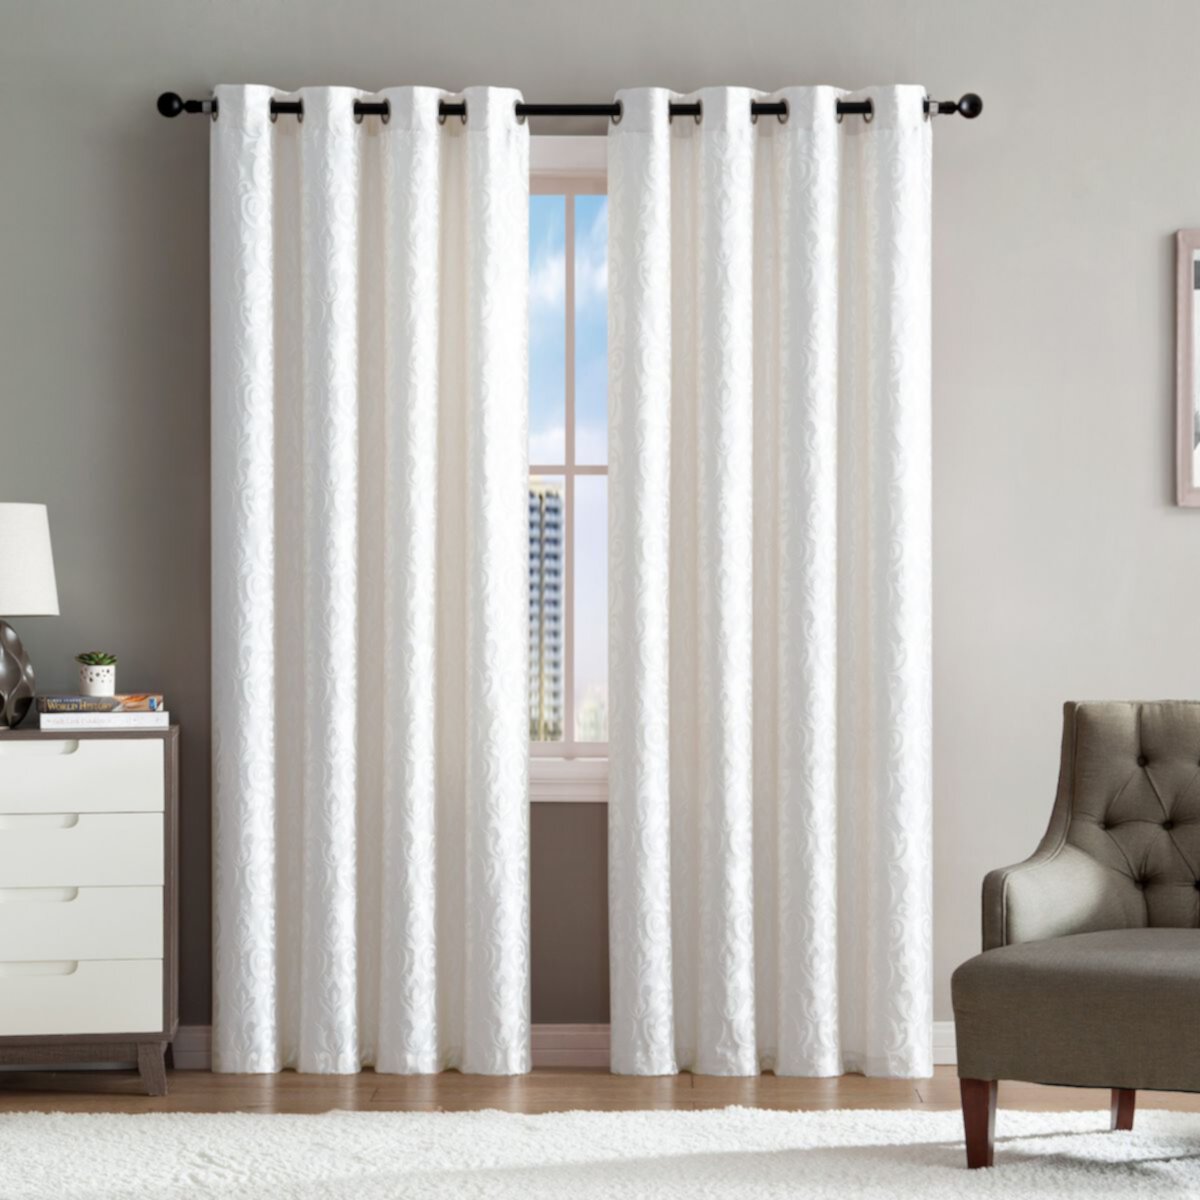 VCNY Home Sophie Damask Woven Jacquard Woven 1 Window Curtain Panel VCNY HOME